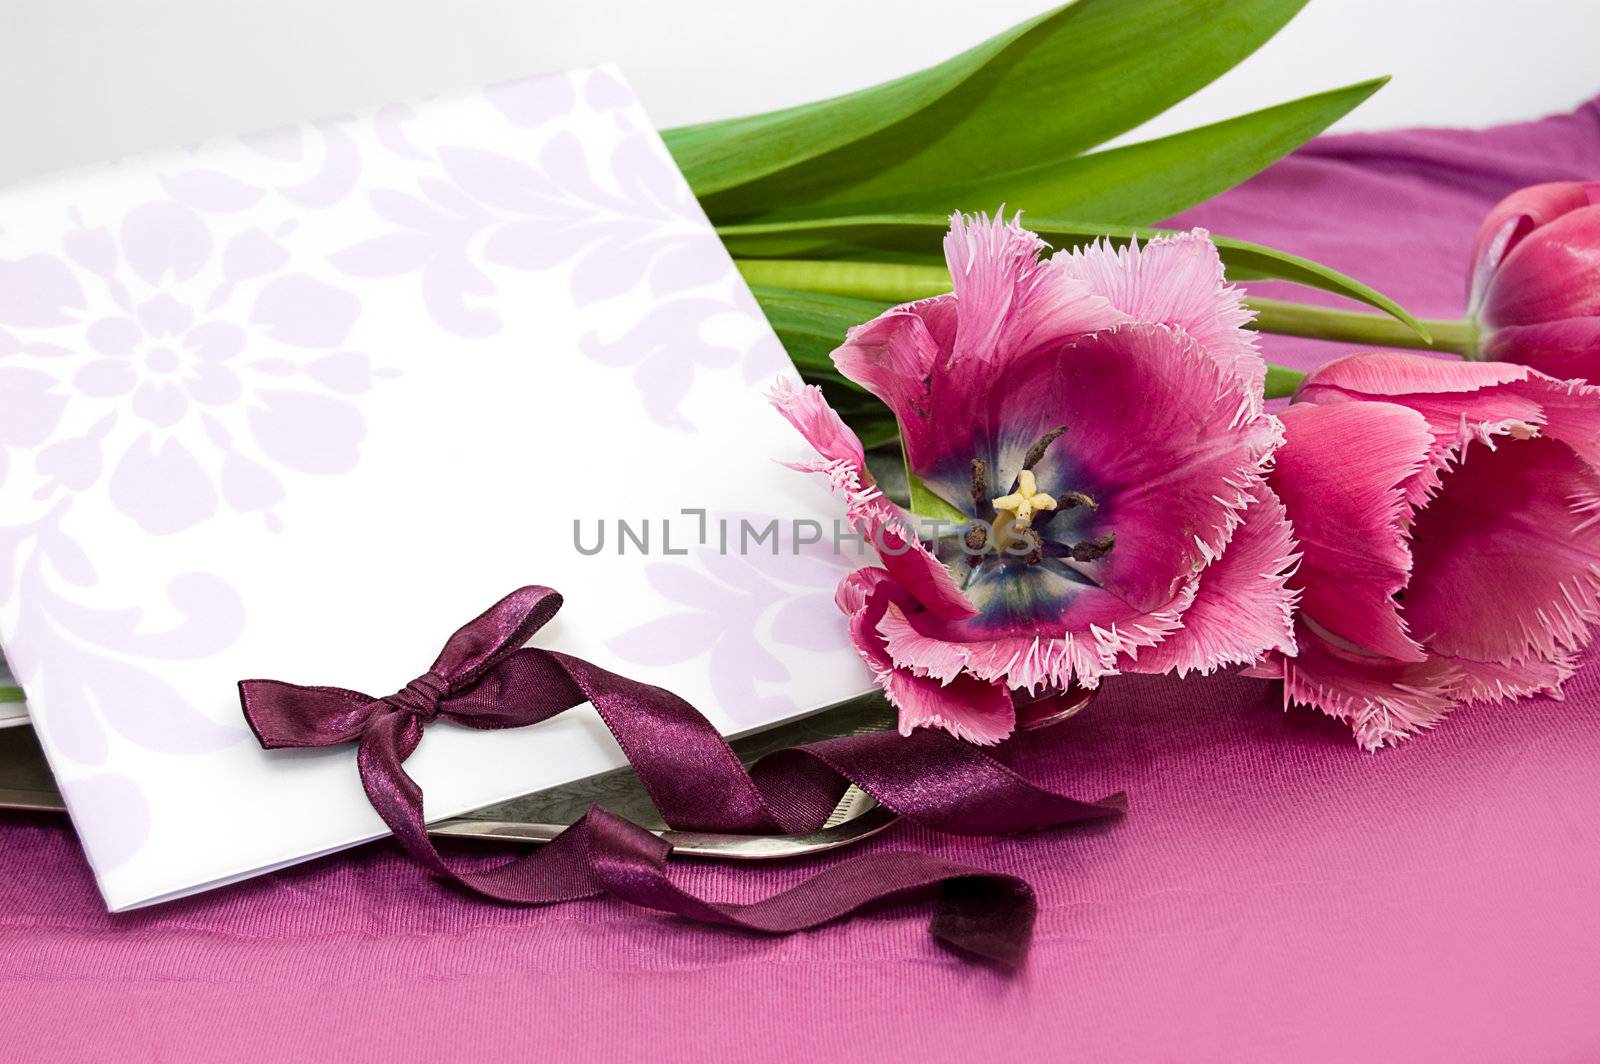 Greeting card with violet tulips and ribbon